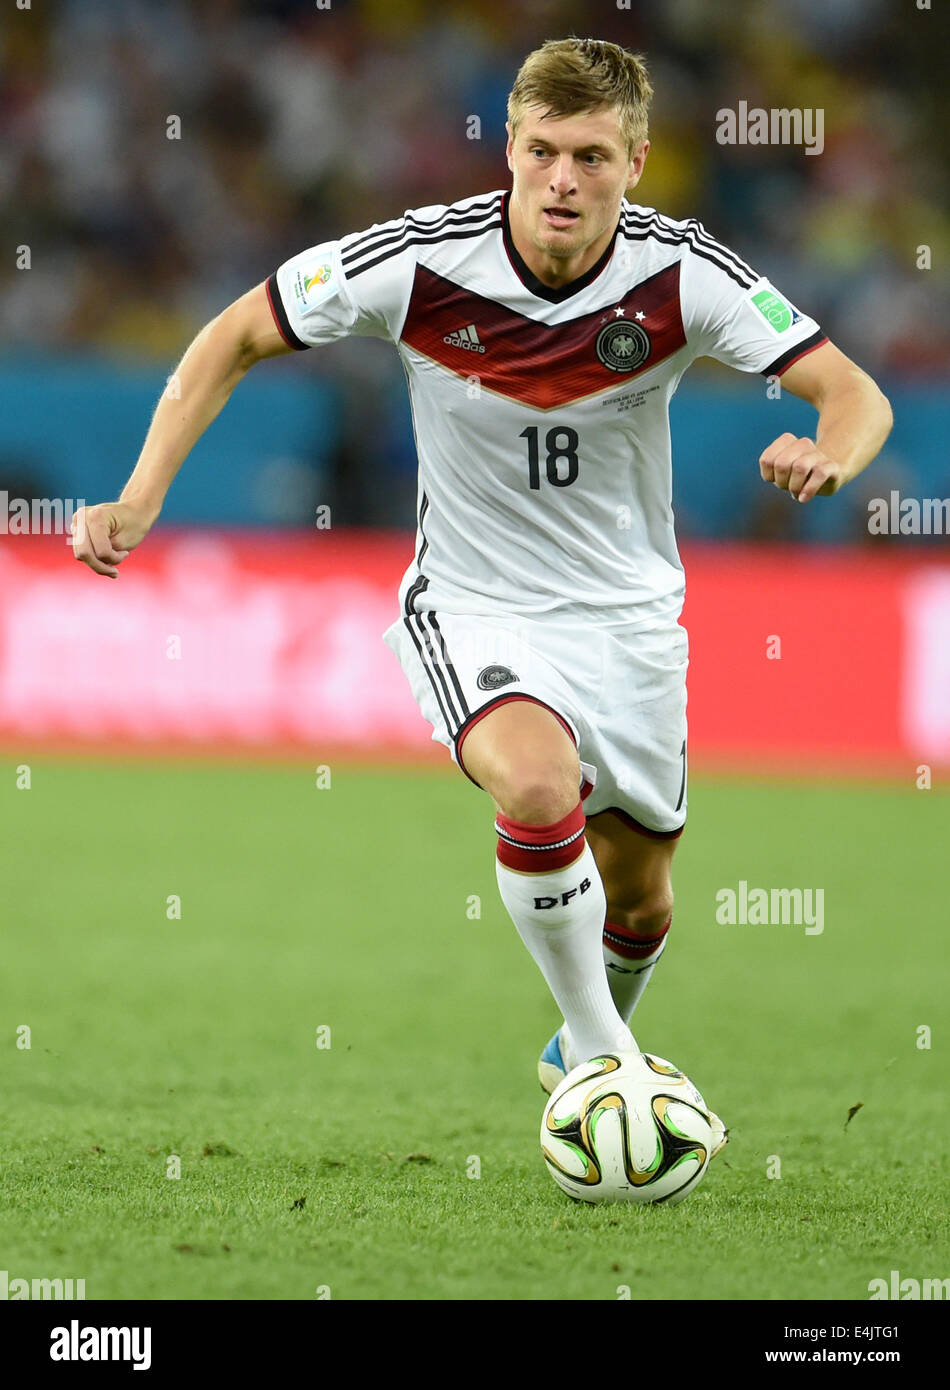 Rio de Janeiro, Brazil. 13th July, 2014. Toni Kroos of Germany in action during the FIFA World Cup 2014 final soccer match between Germany and Argentina at the Estadio do Maracana in Rio de Janeiro, Brazil, 13 July 2014. Photo: Andreas Gebert/dpa/Alamy Live News Stock Photo